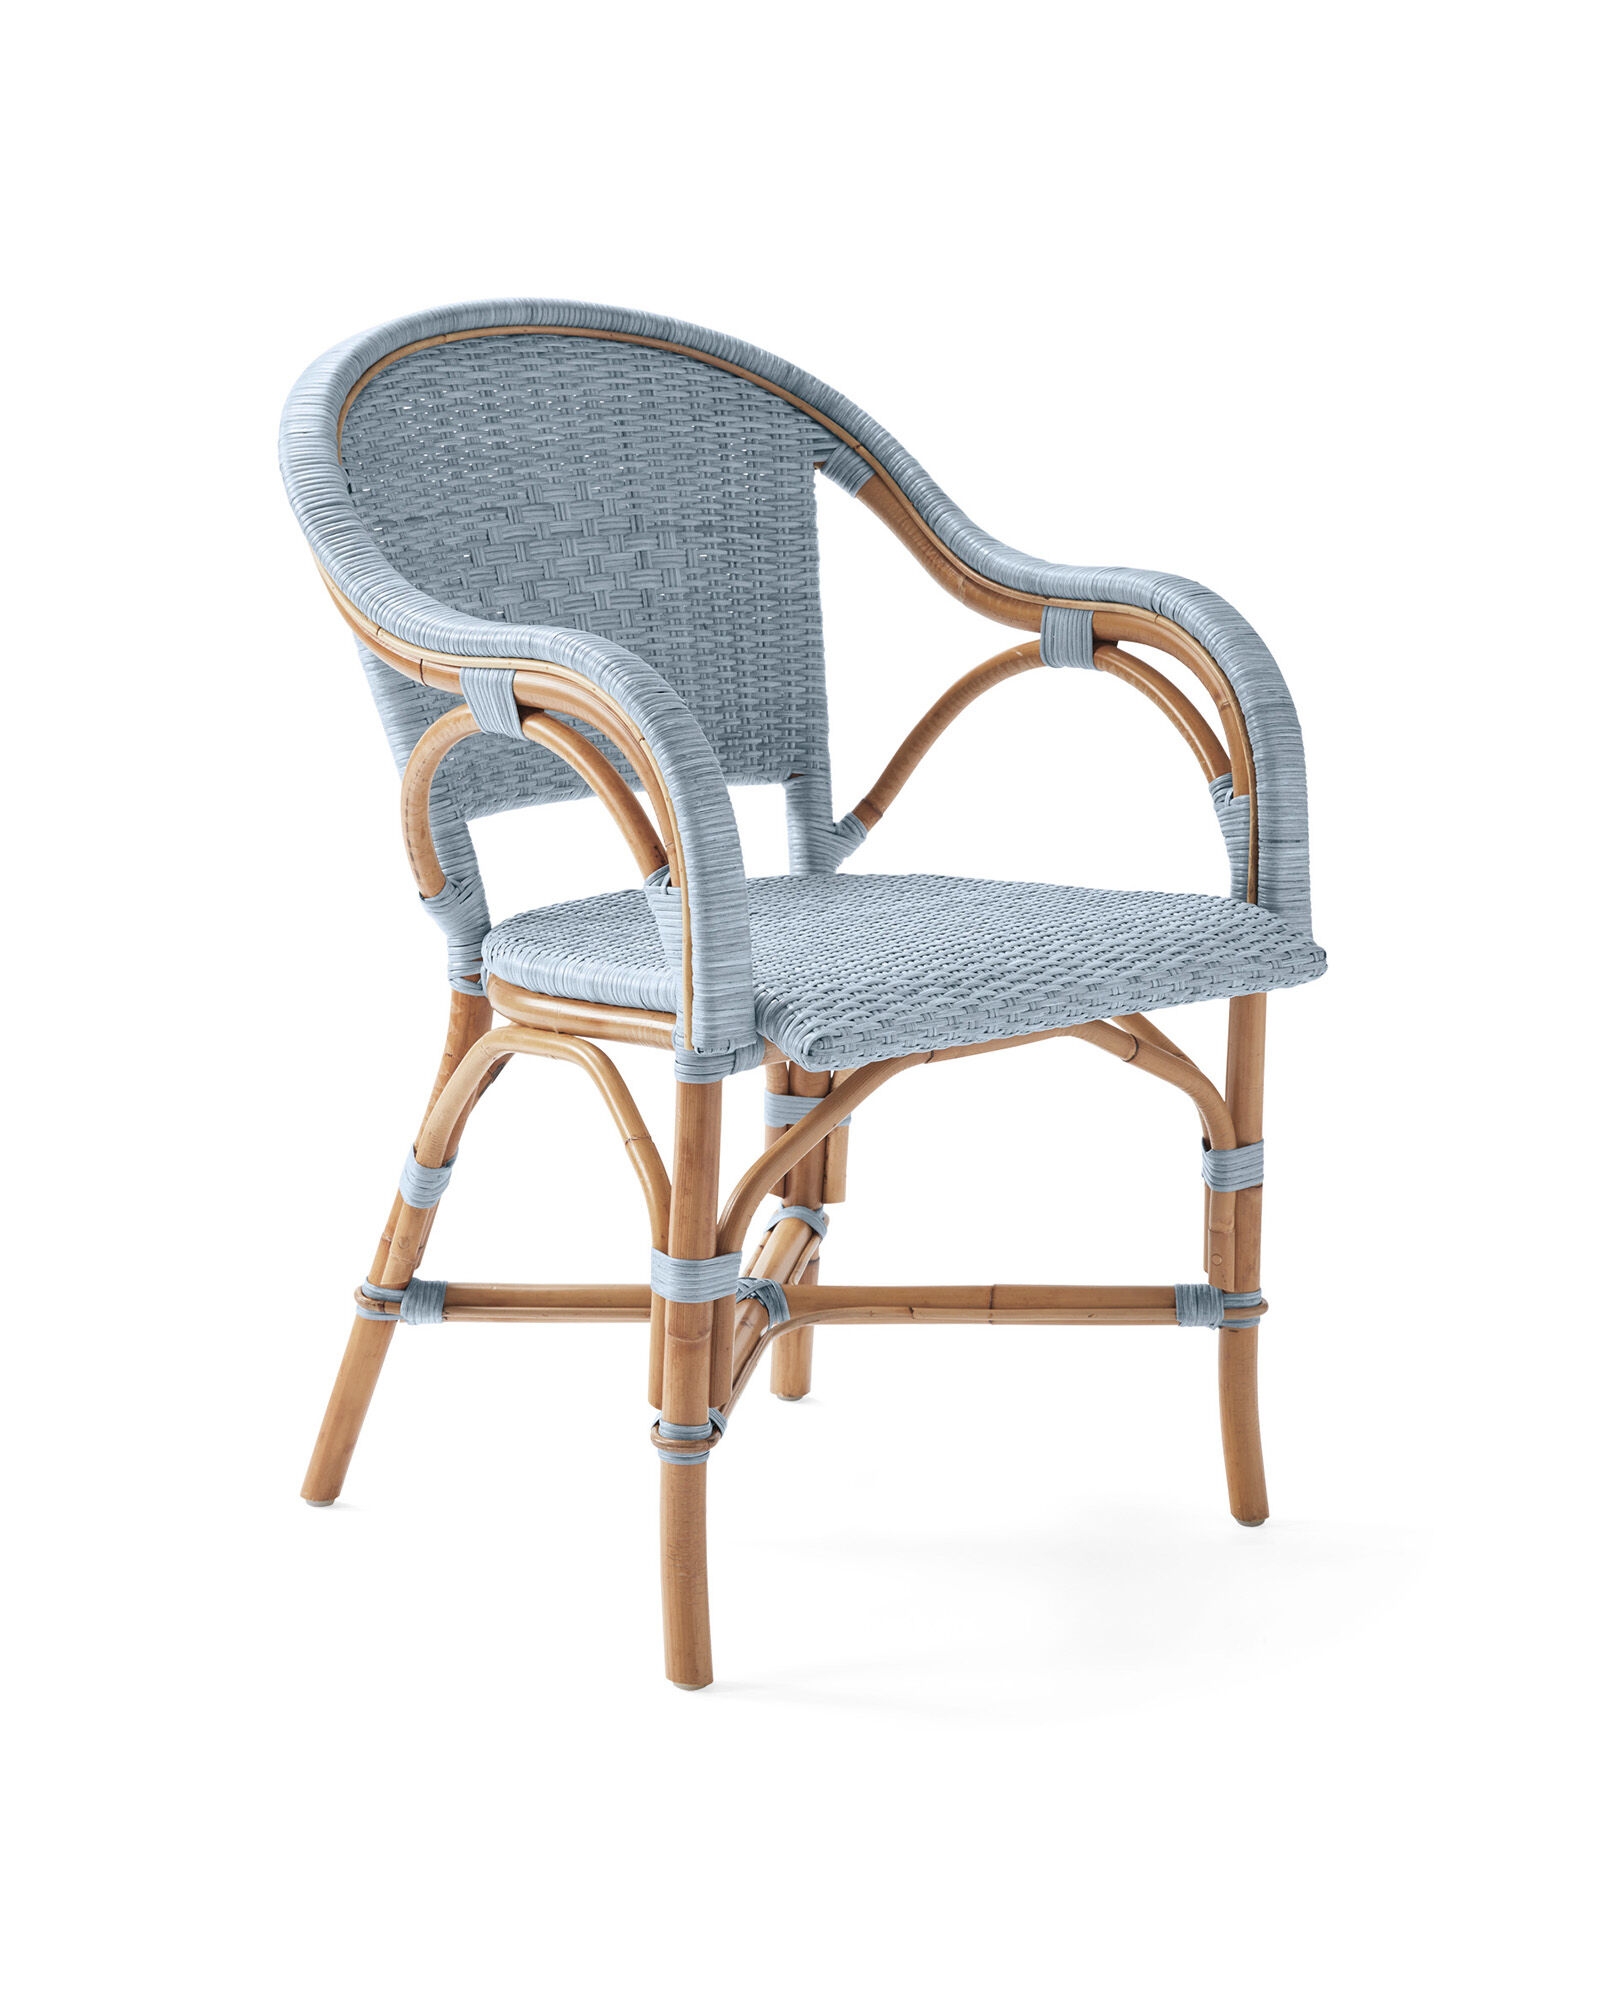 Sunwashed Riviera Rattan Dining Chair - Image 0